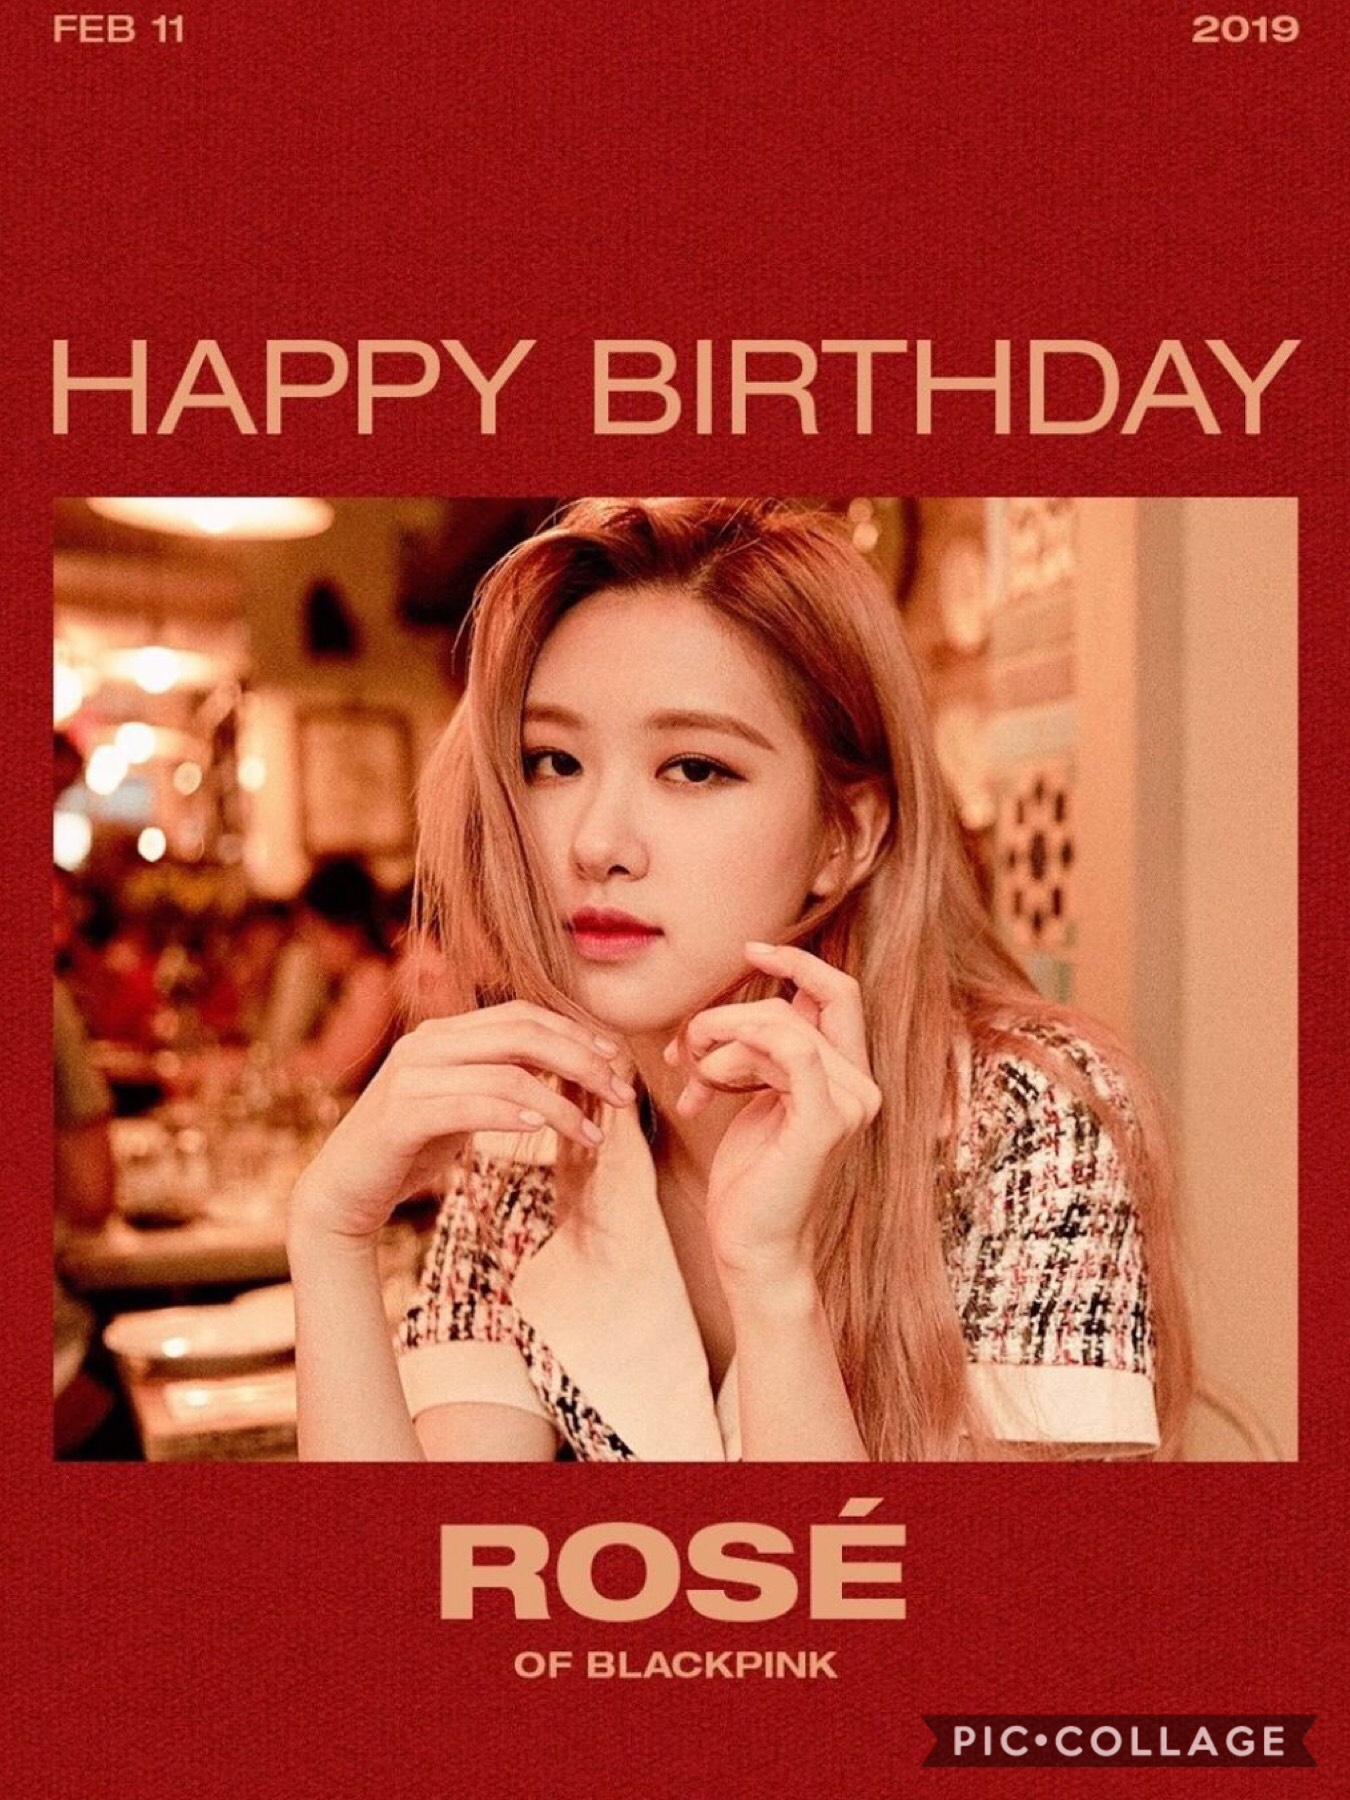 For them in soul it’s already the 11th of feb so happy birthday rose I’ll make a better one later (tomorrow)  but for now this is all I can do .  생일 축하 ❤️❤️❤️❤️❤️🌹🌹🌹🌹🌹🌹🌹🌹🌹